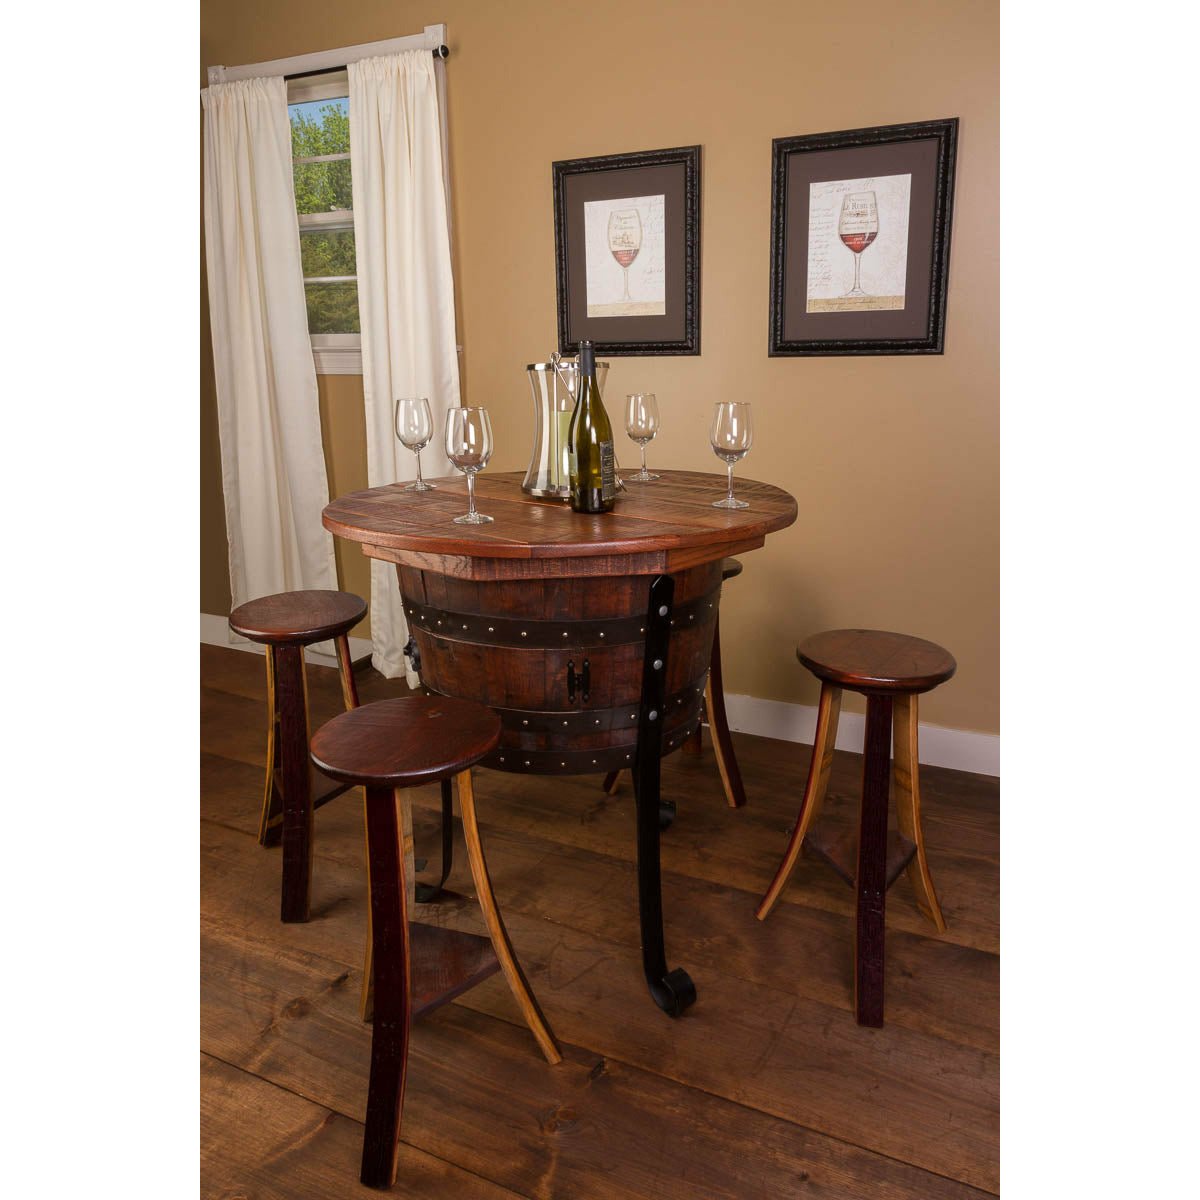 Napa East Old World Table with Cabinet Set - The Bar Design